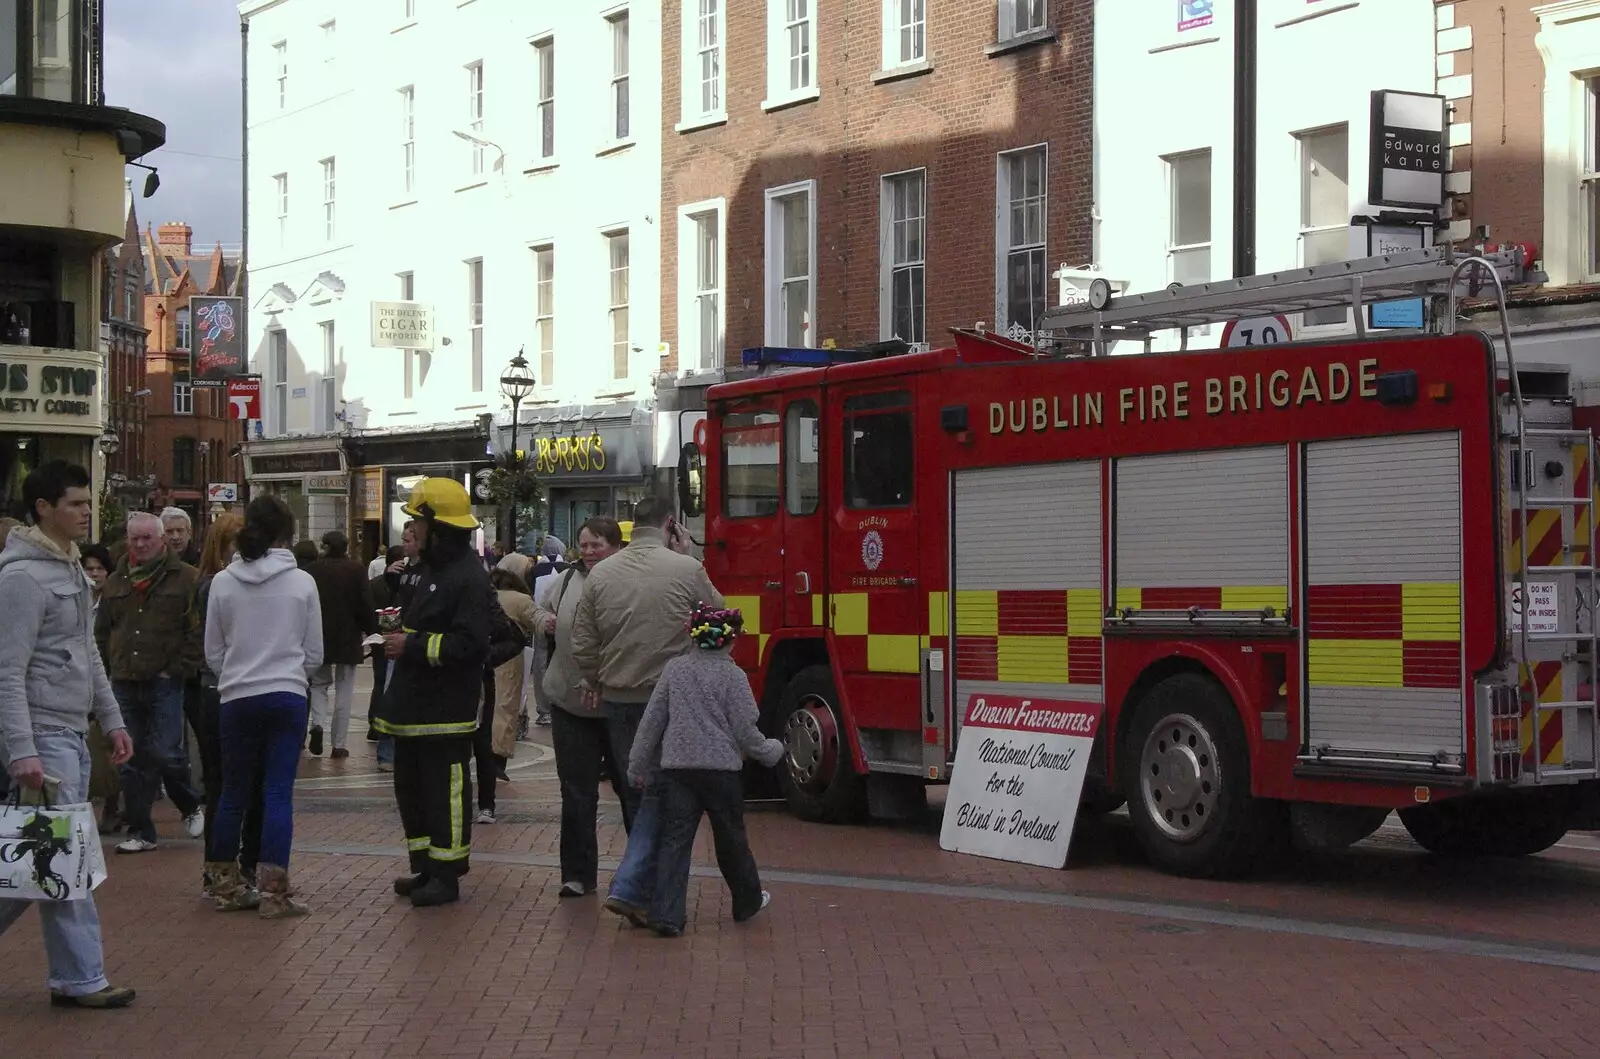 A fire engine does fund-raising on Grafton Street, from Easter in Dublin, Ireland - 21st March 2008